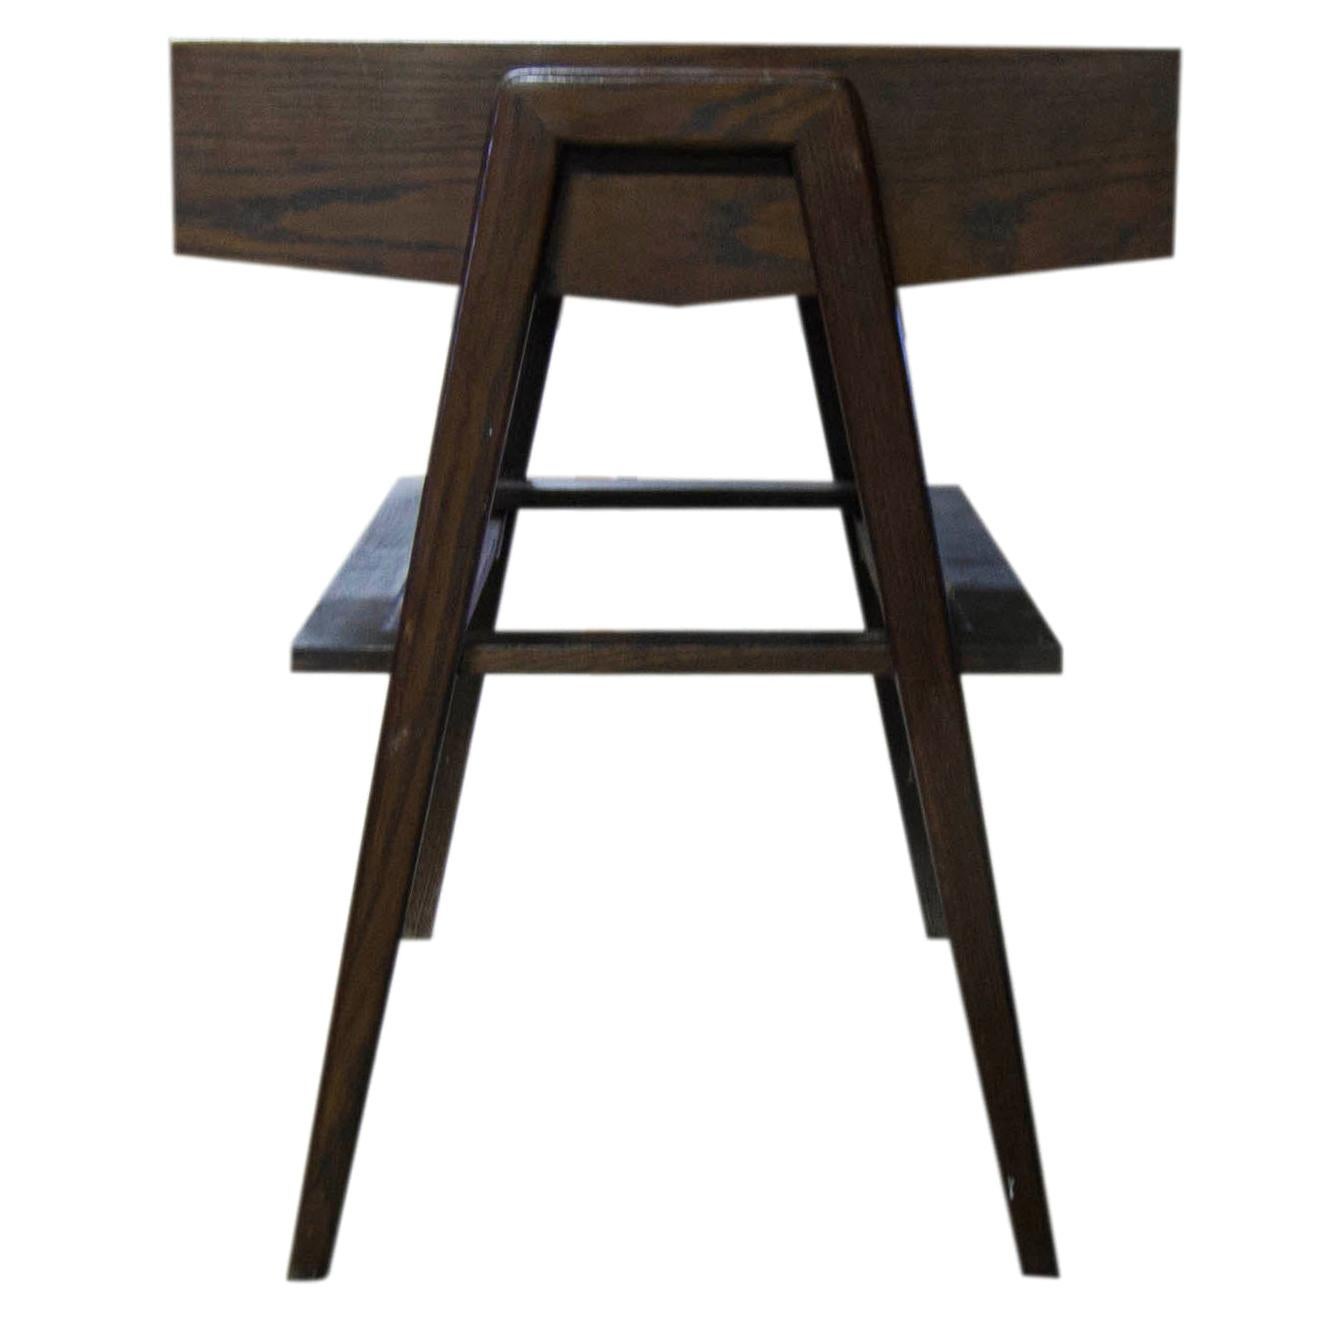 Midcentury Positing Side Table, Europe